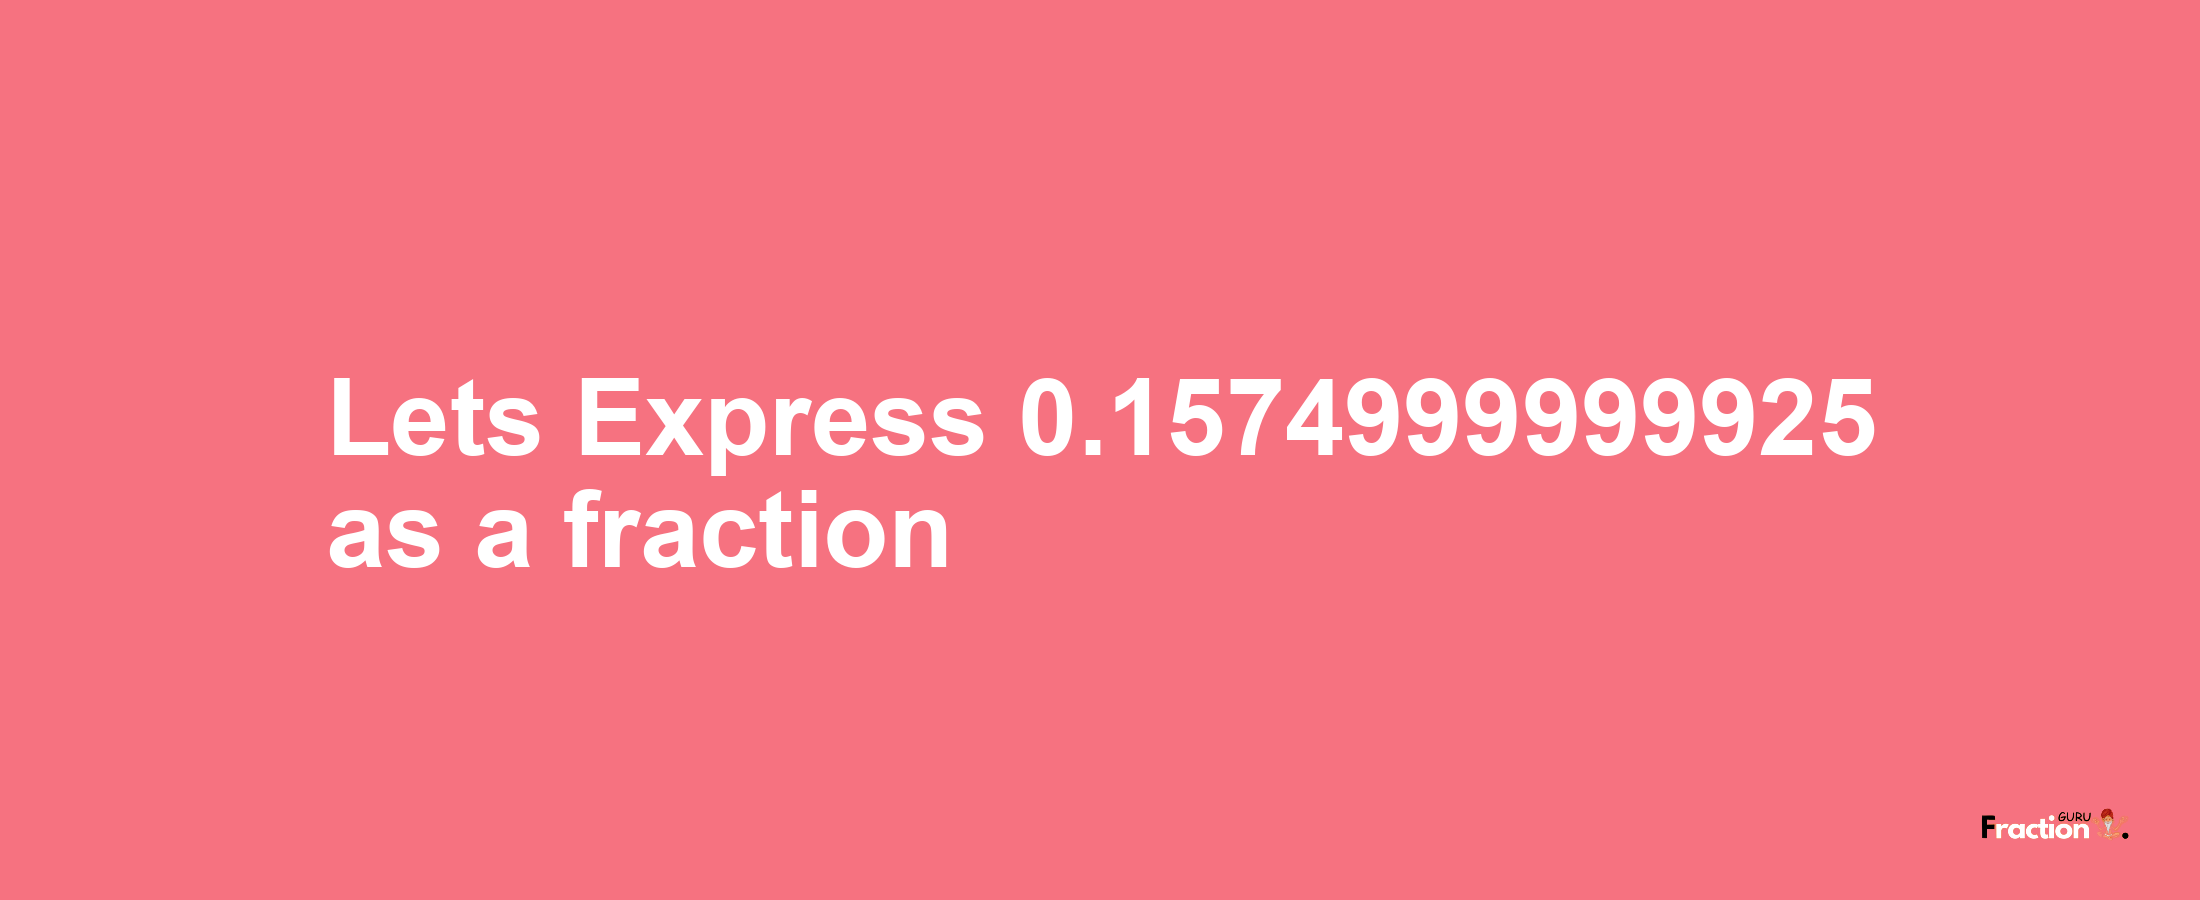 Lets Express 0.1574999999925 as afraction